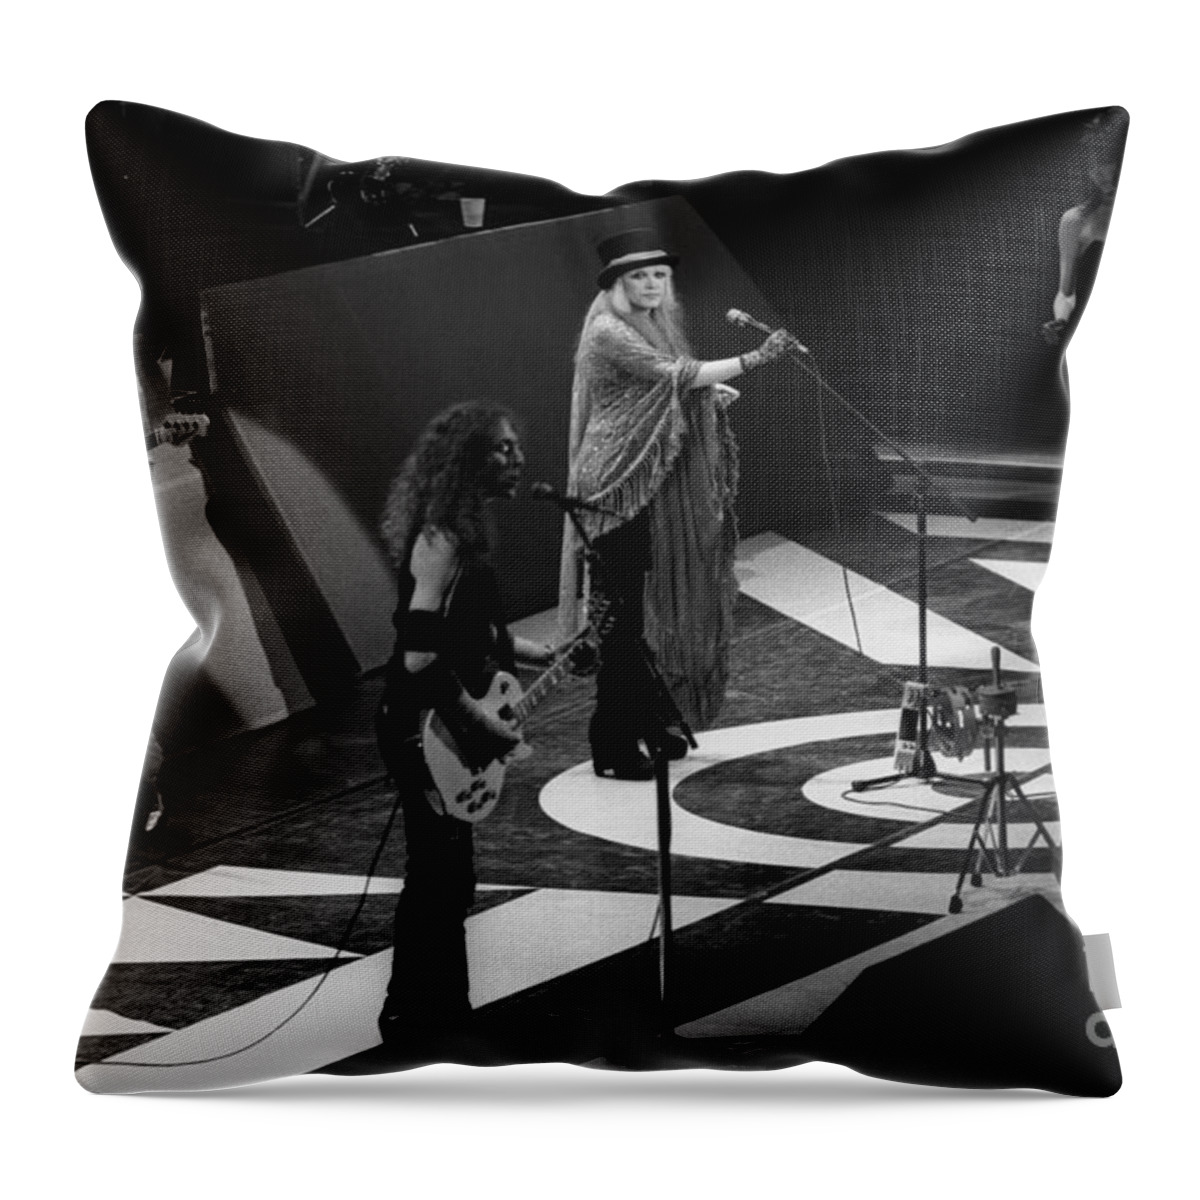 Singer Throw Pillow featuring the photograph Stevie Nicks #1 by Concert Photos